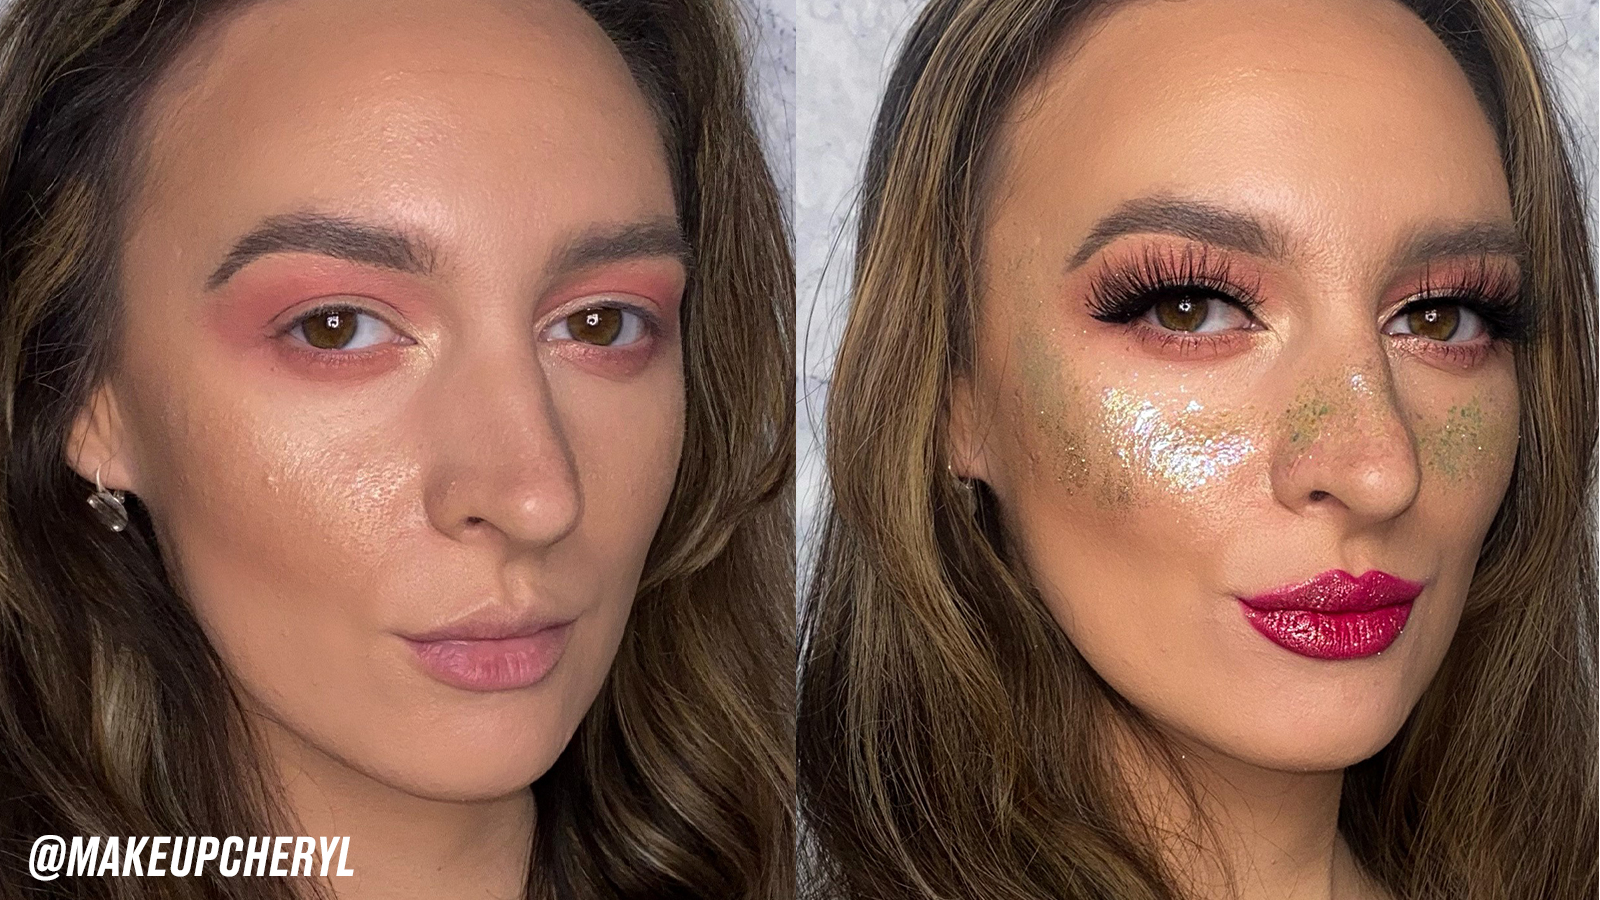 How To Apply Glitter To Face - Beauty Bay Edited